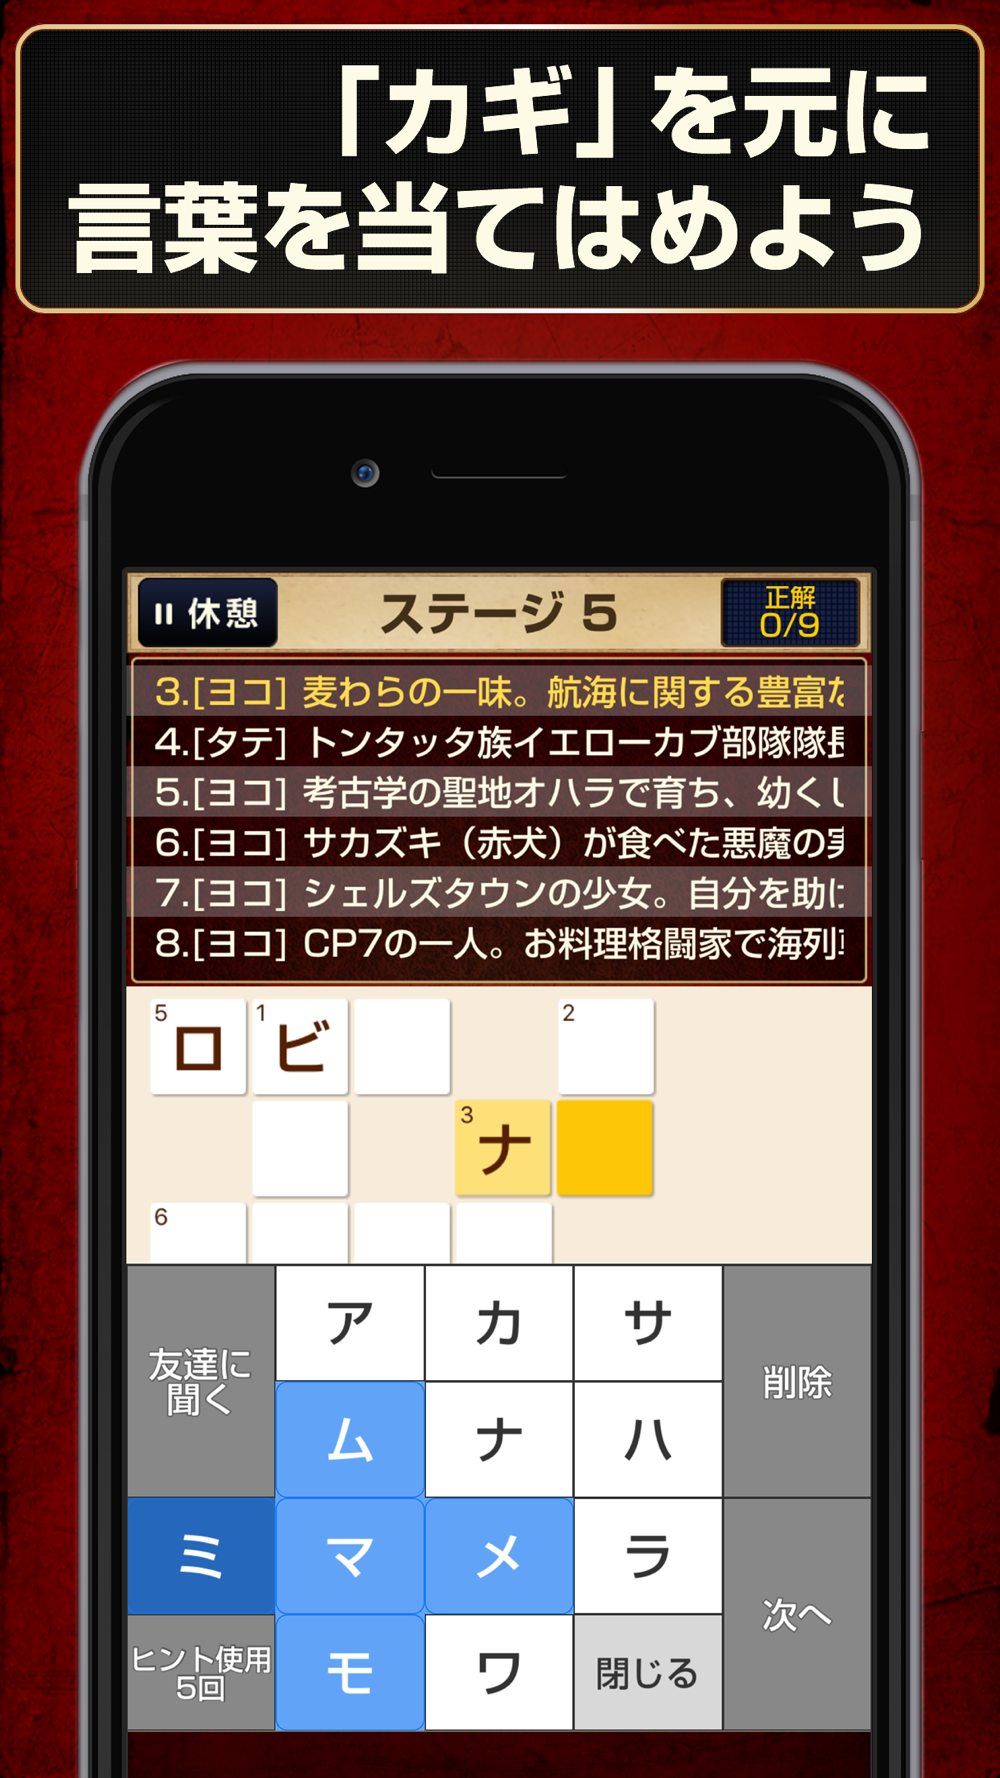 Crossword Puzzle For One Piece Edition Free Download App For Iphone Steprimo Com